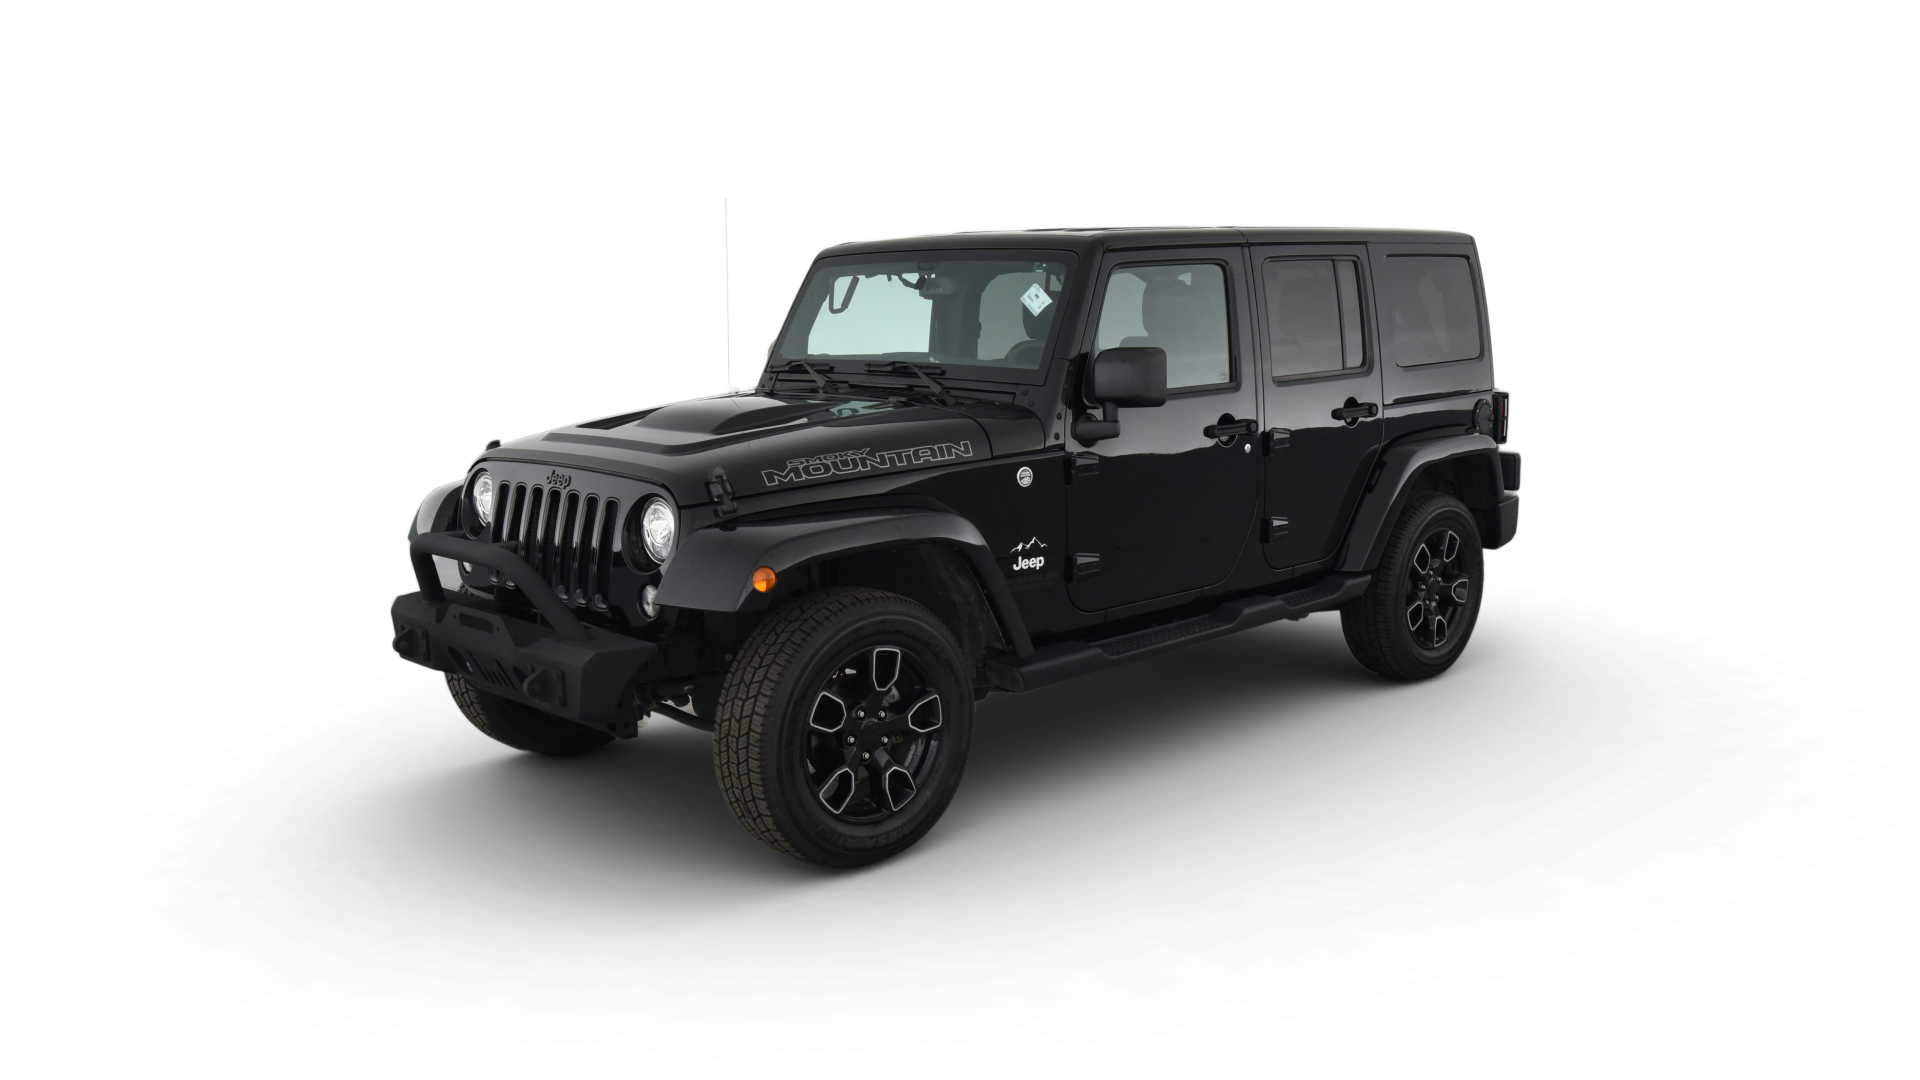 Used Jeep Wrangler Unlimited Smoky Mountain For Sale Online | Carvana